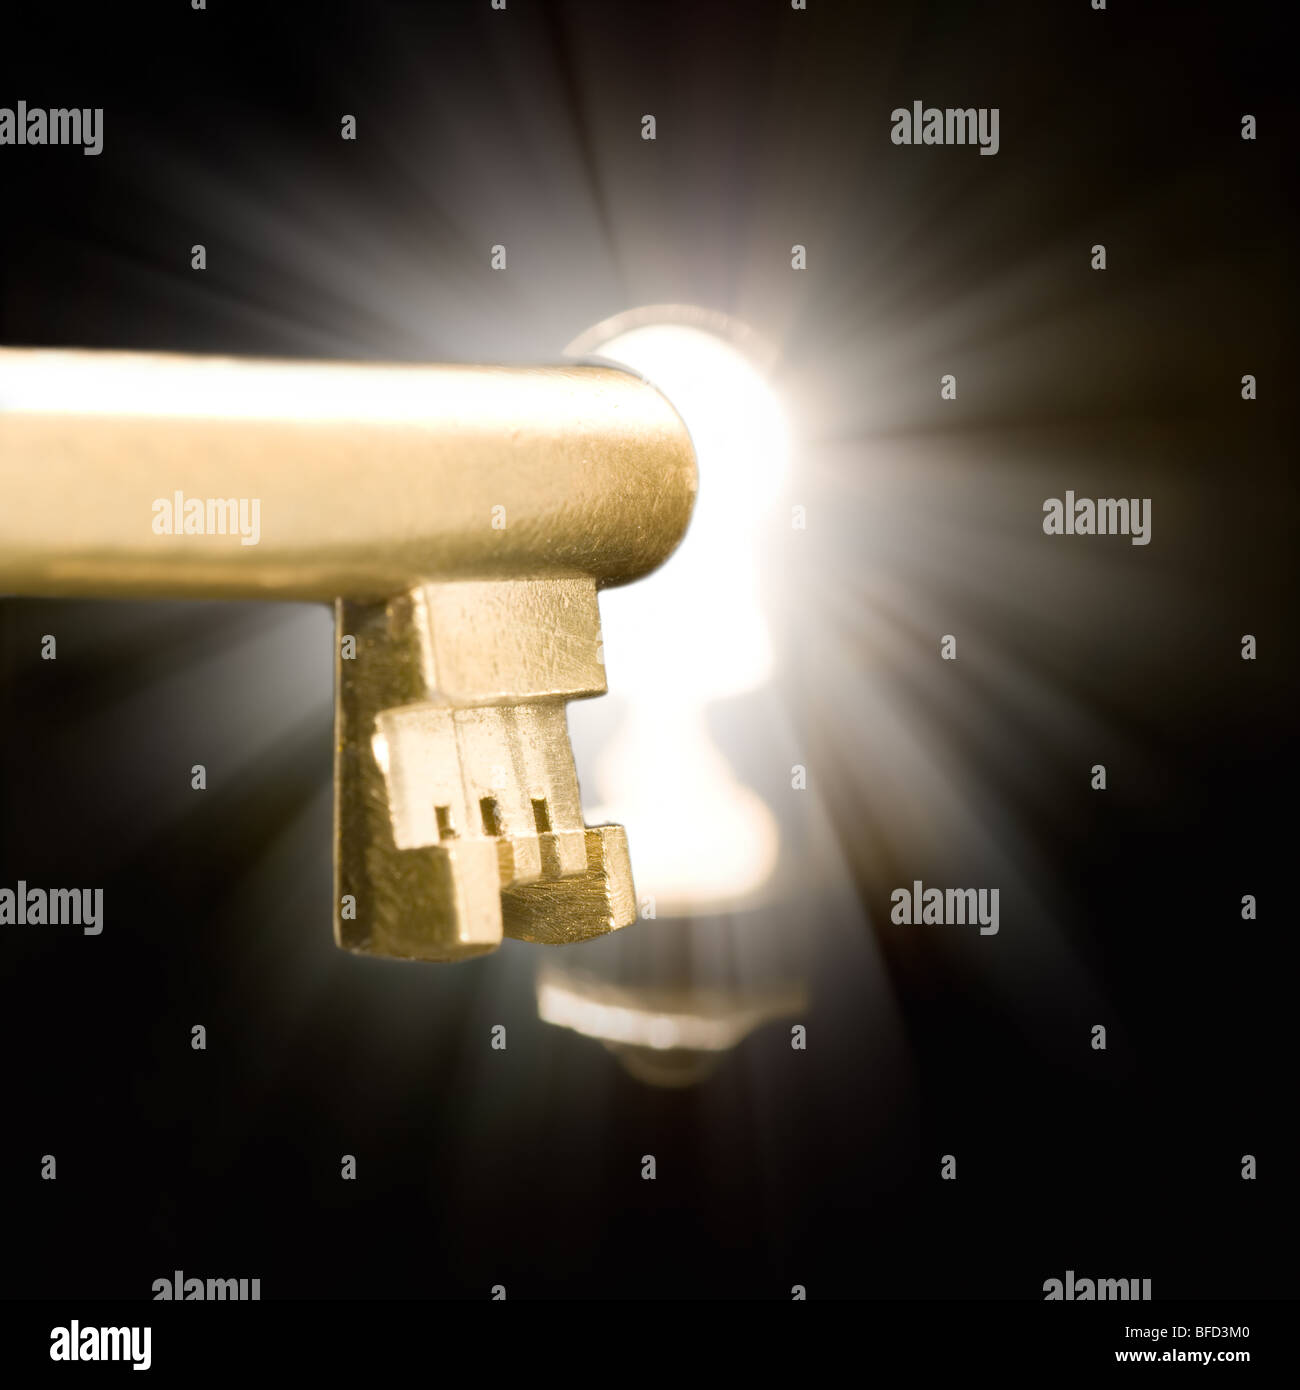 A golden key in a keyhole illuminated by a mysterious light coming from the other side. Stock Photo